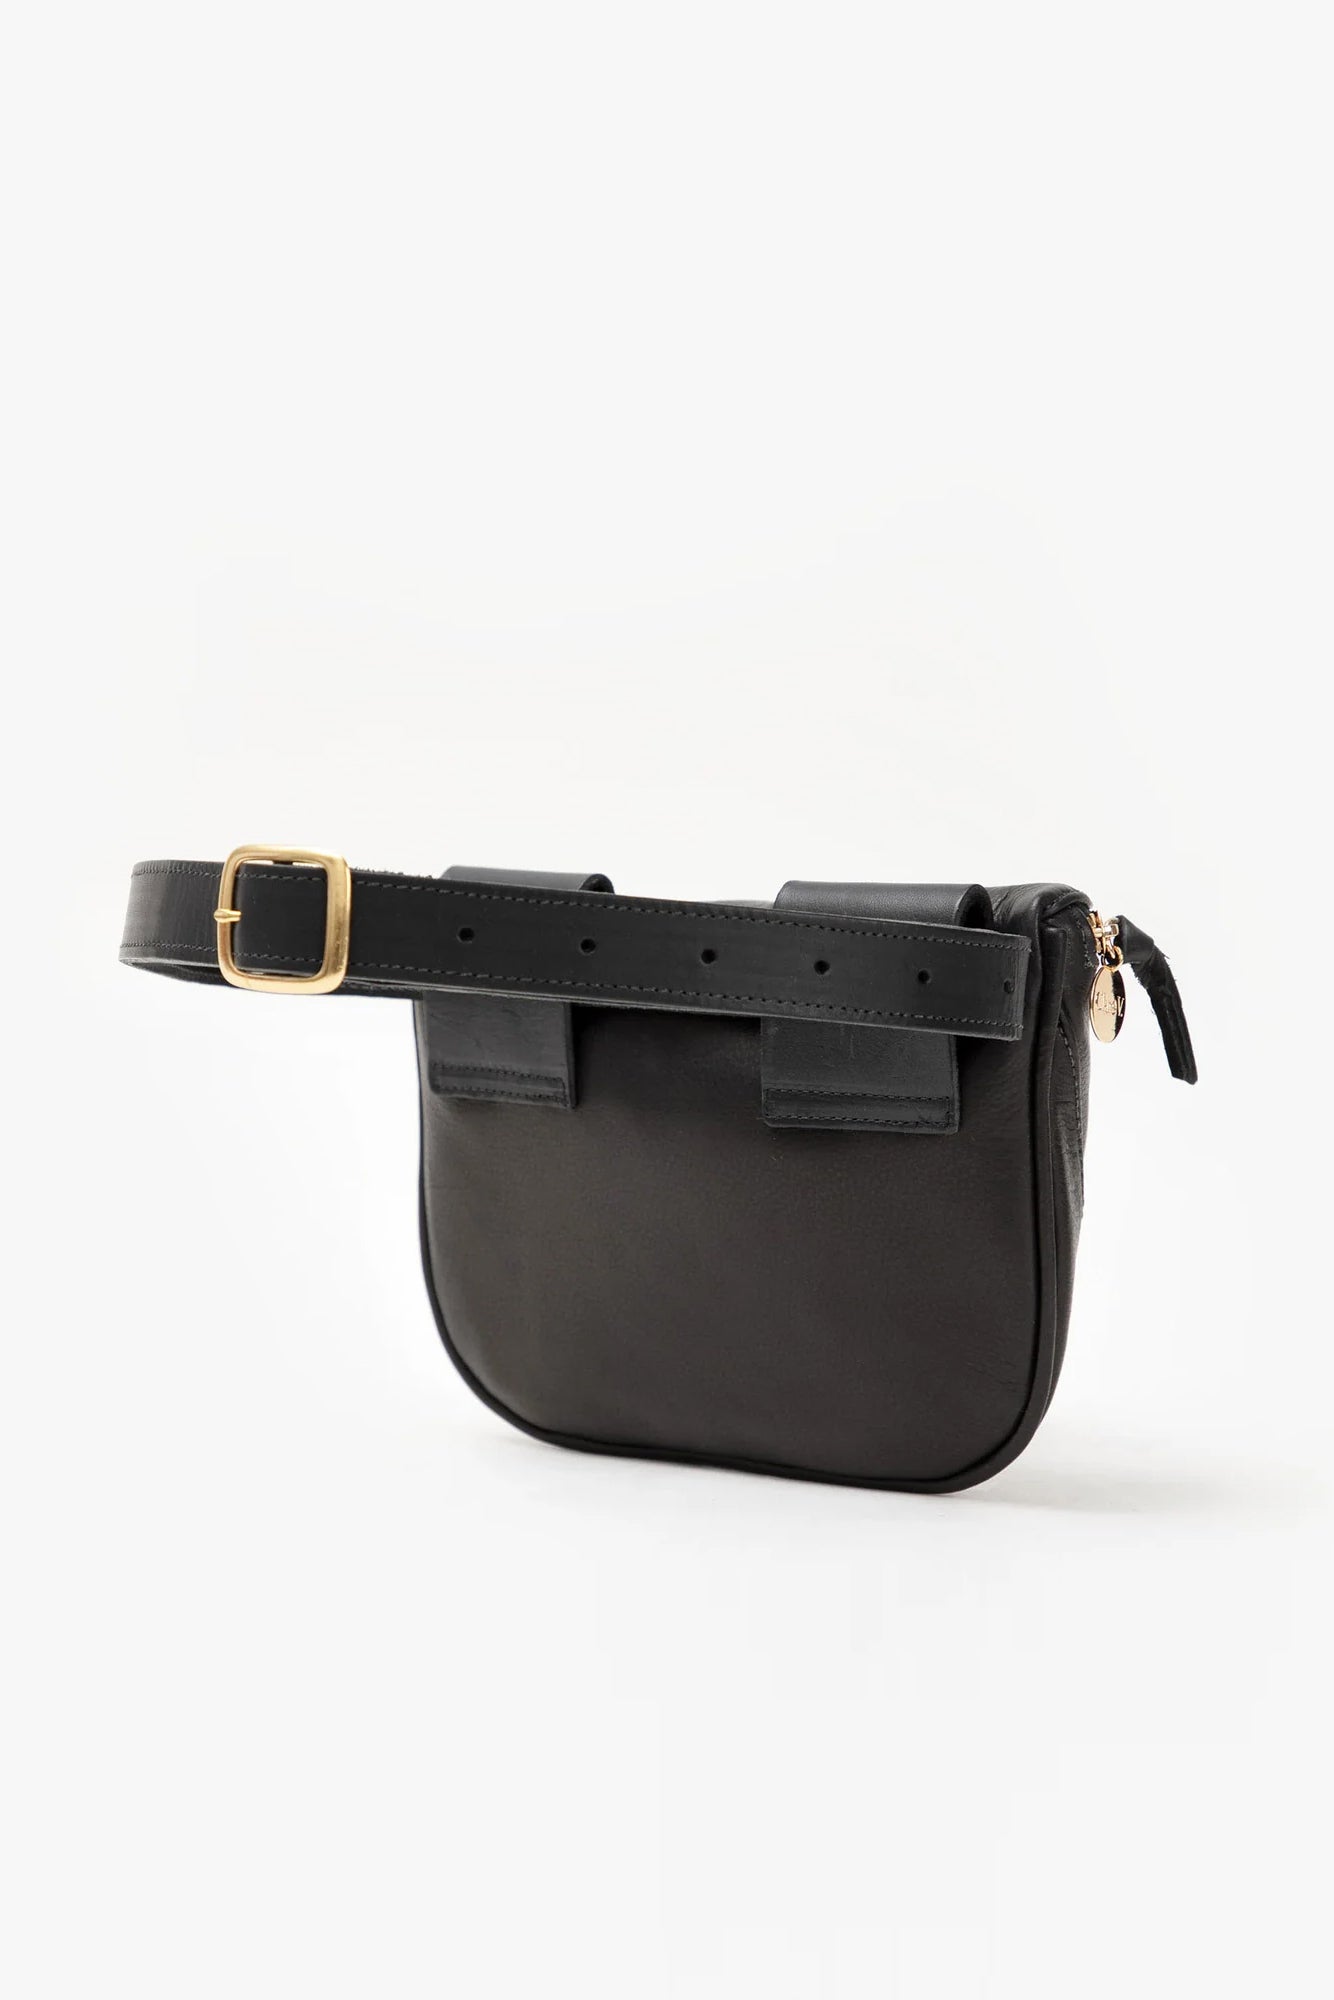 Fanny Pack Accessories Clare V.   